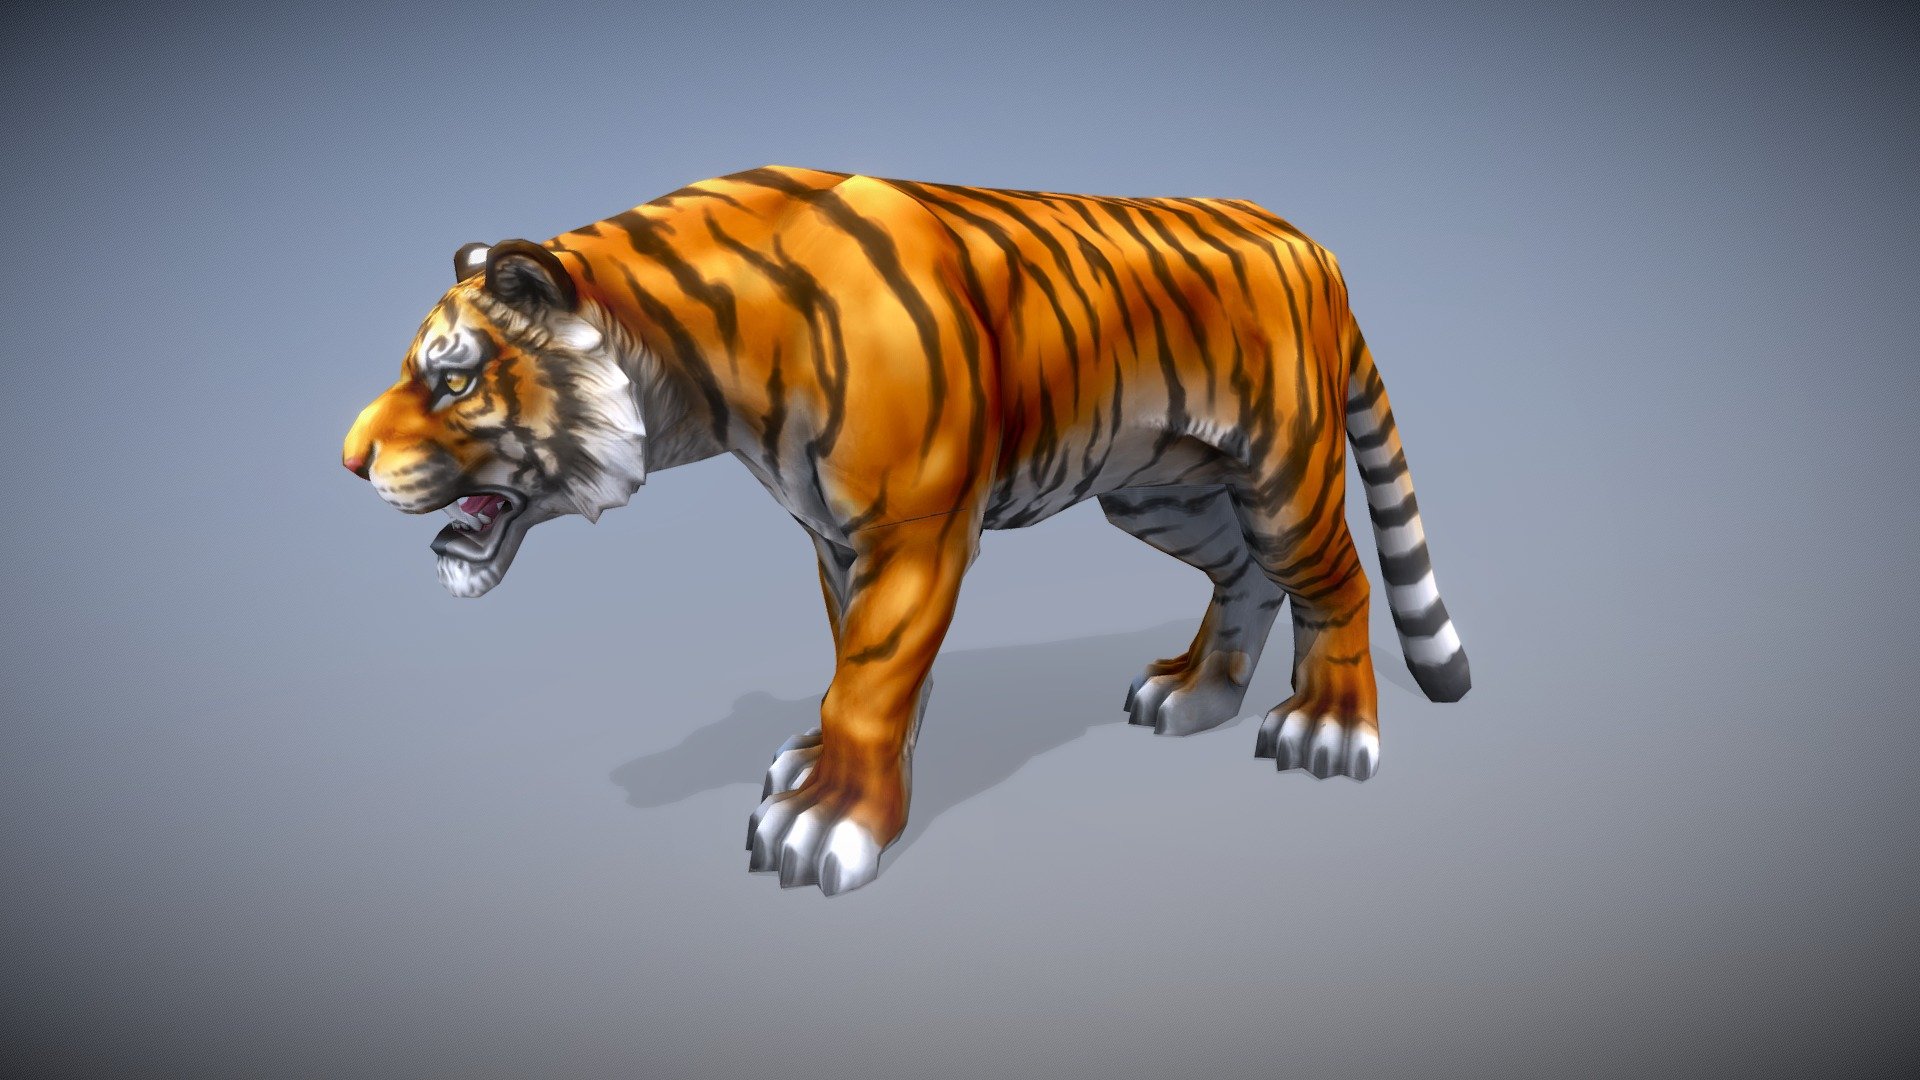 Tiger - Low Poly, Hand Painted